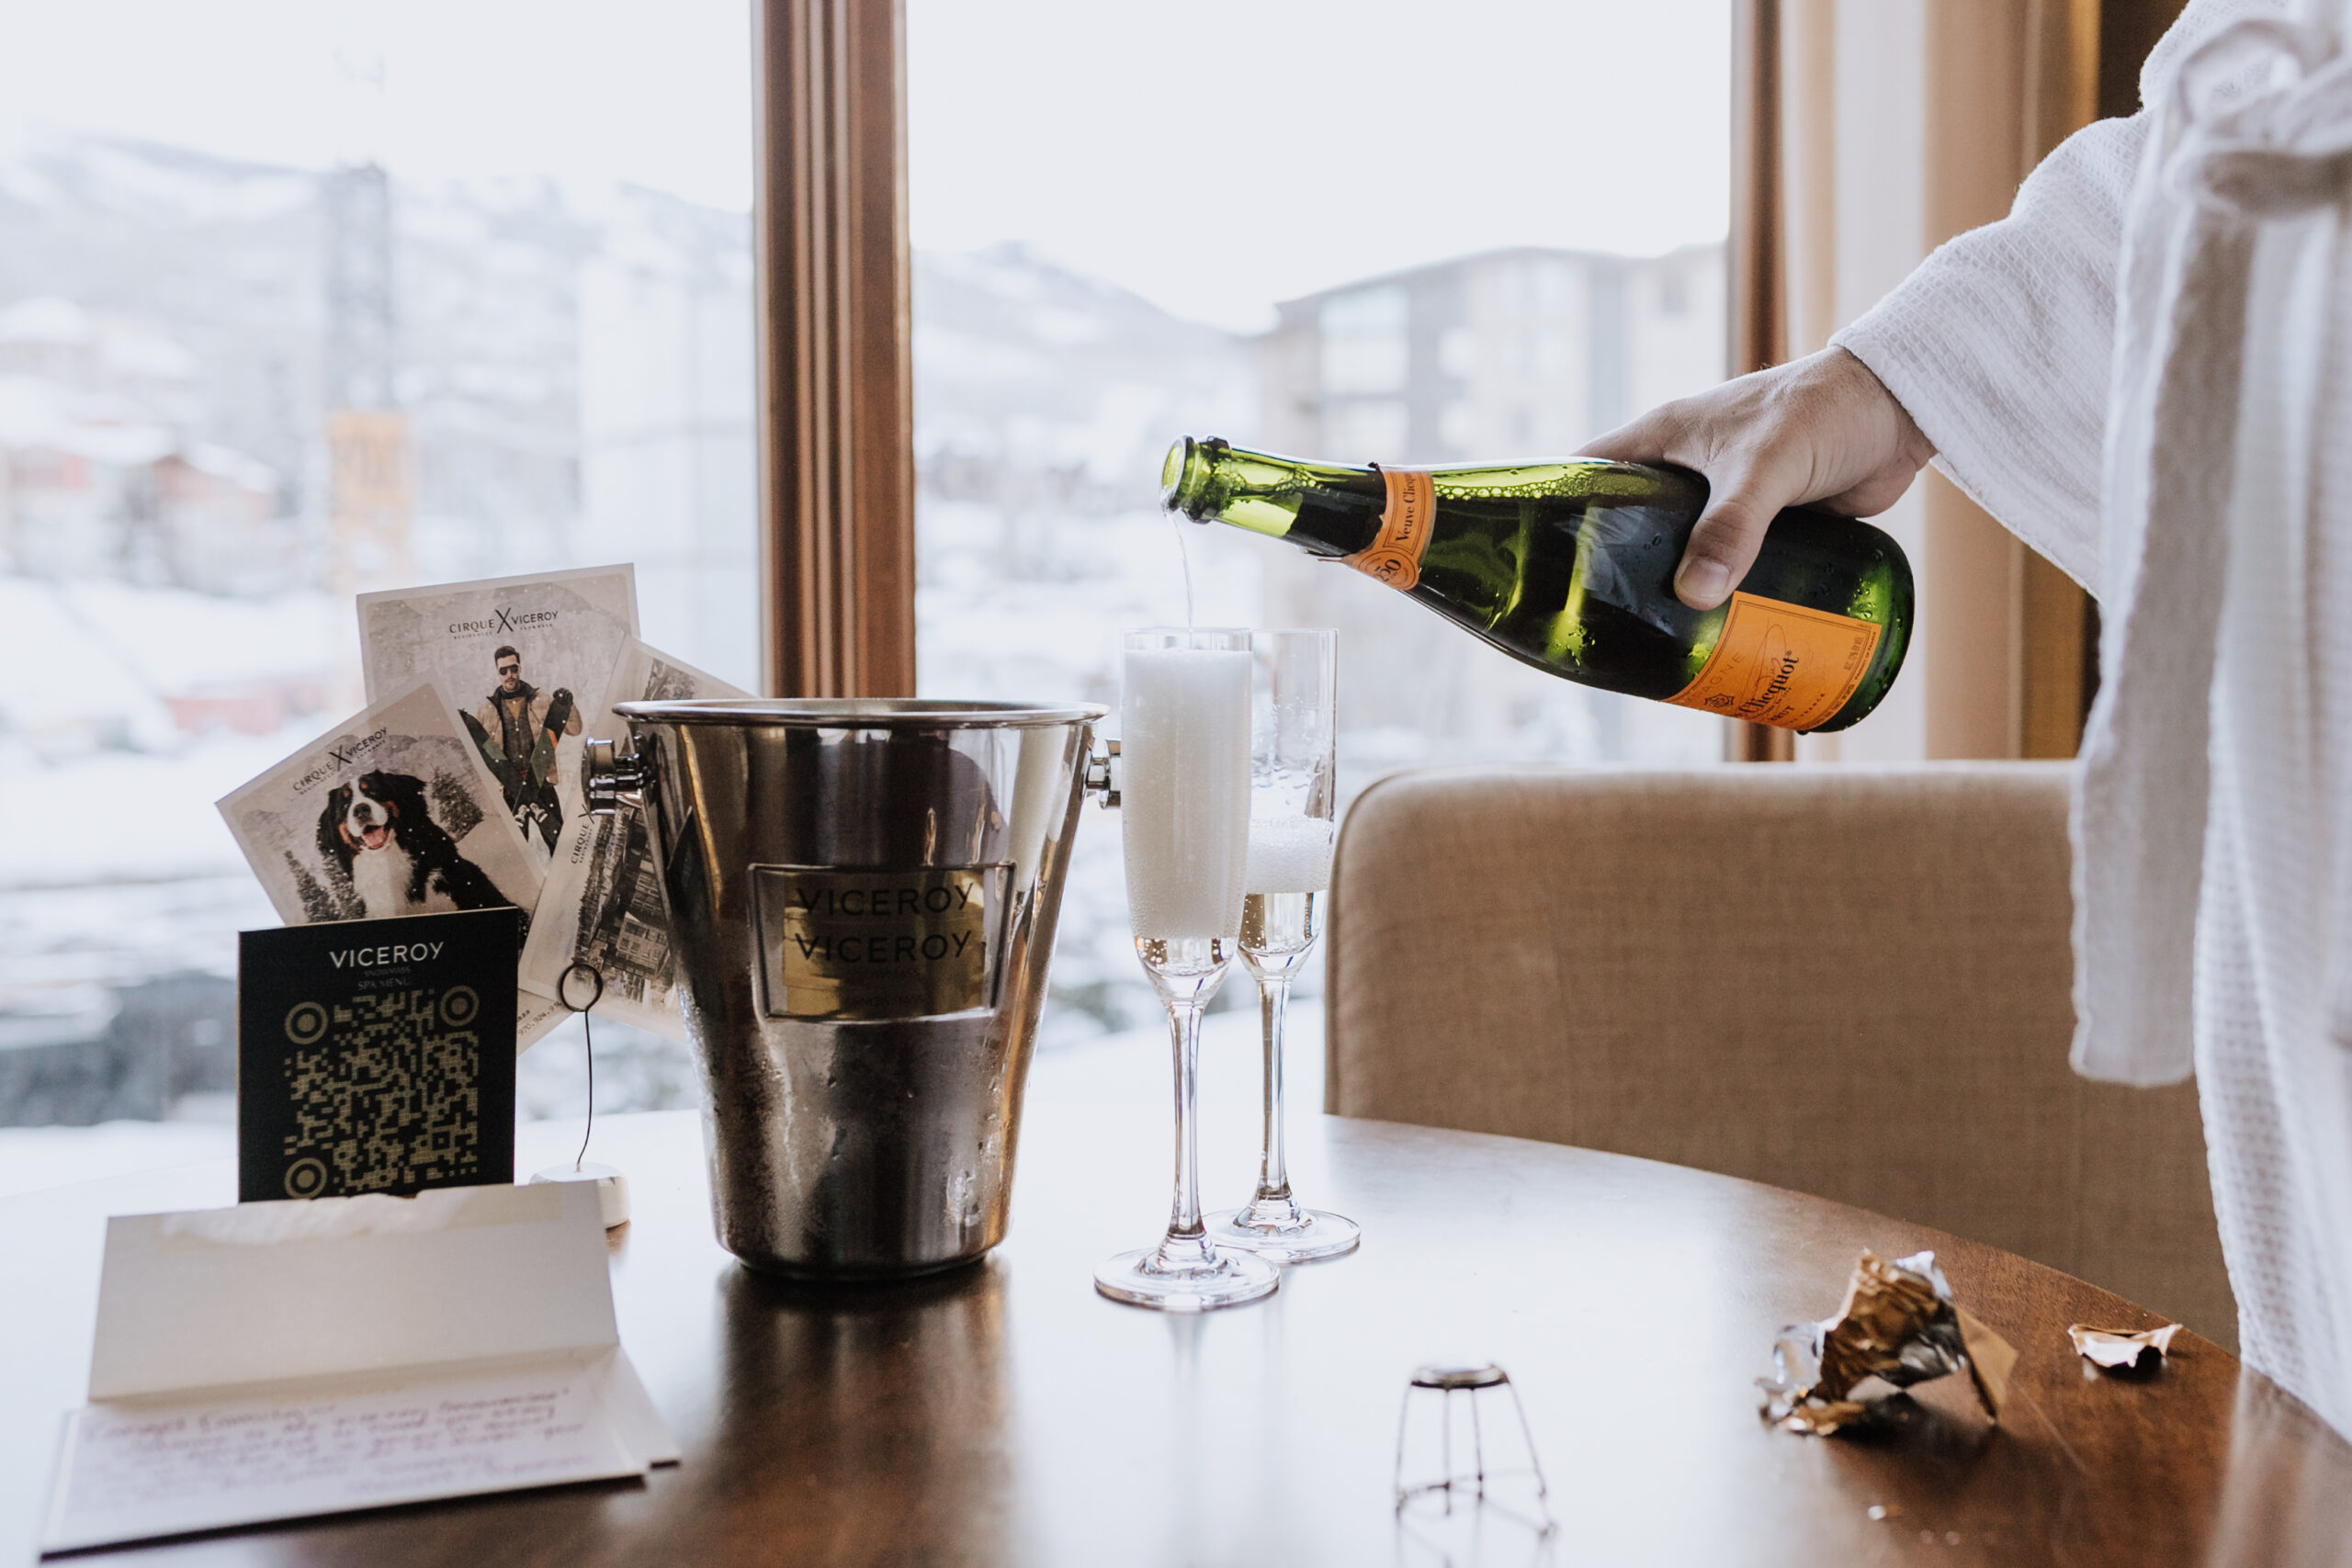 champagne after a long day of skiing is my love language #viceroysnowmass #luxurytravel